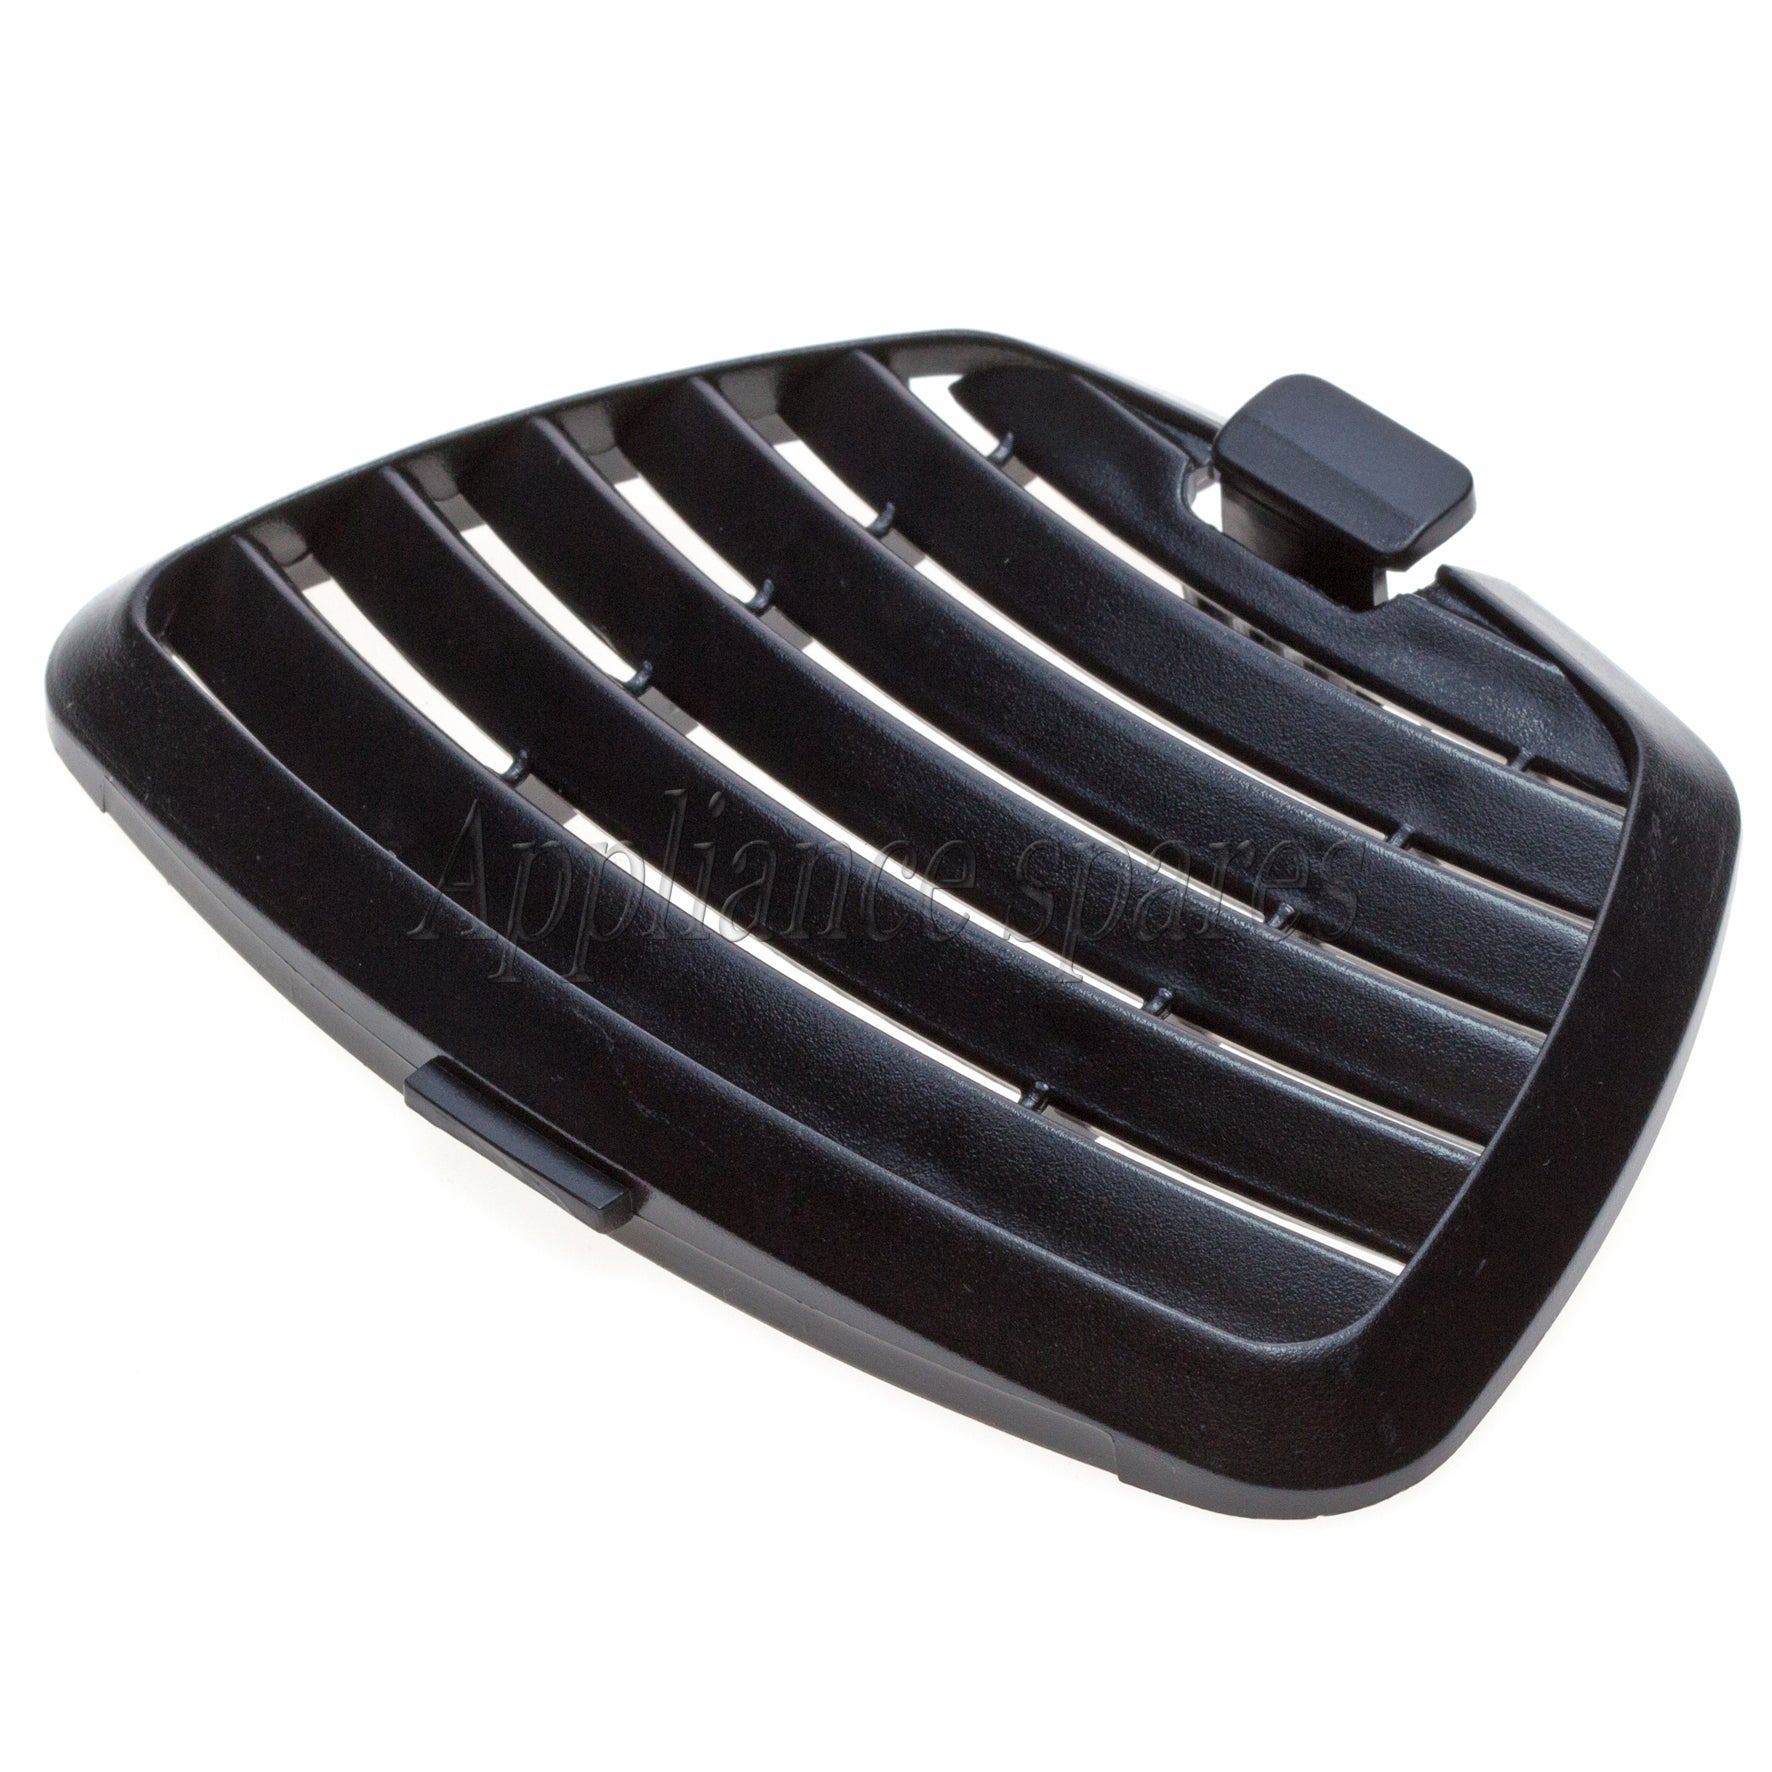 LG Vacuum Cleaner Exhaust Filter Cover